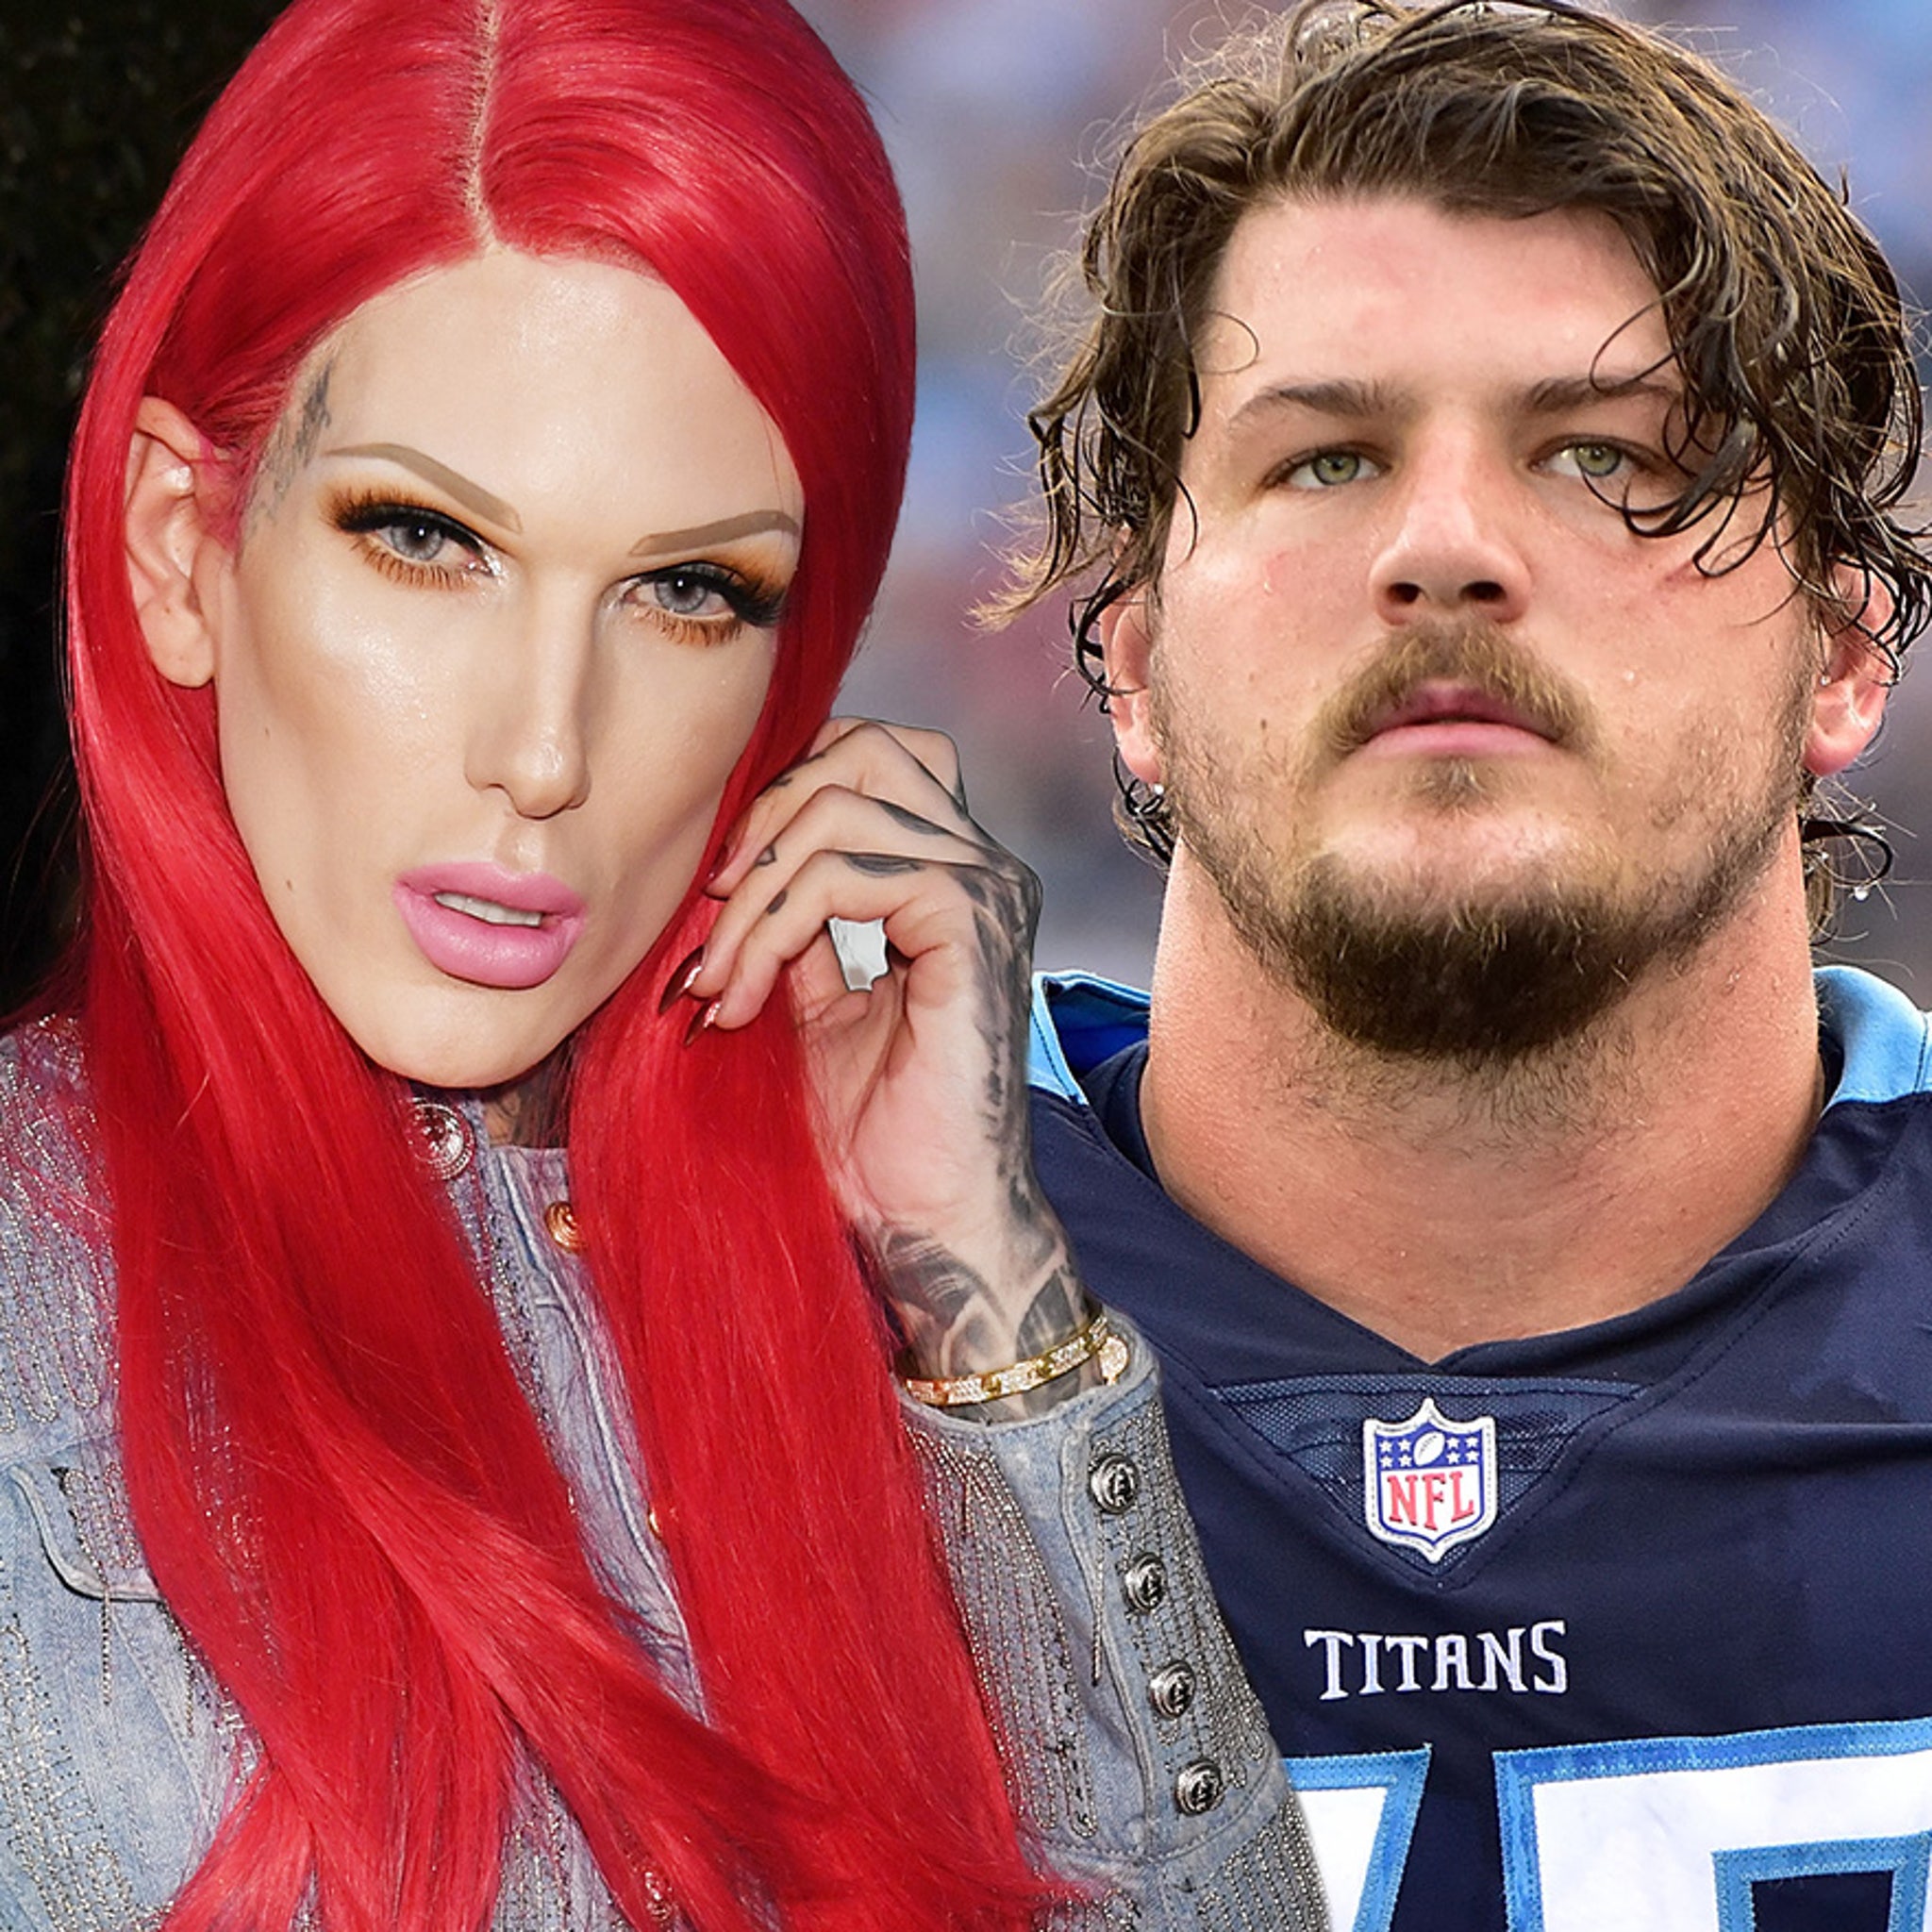 Jeffree Star Reveals 'NFL Boo' Is Taylor Lewan, But They're Just